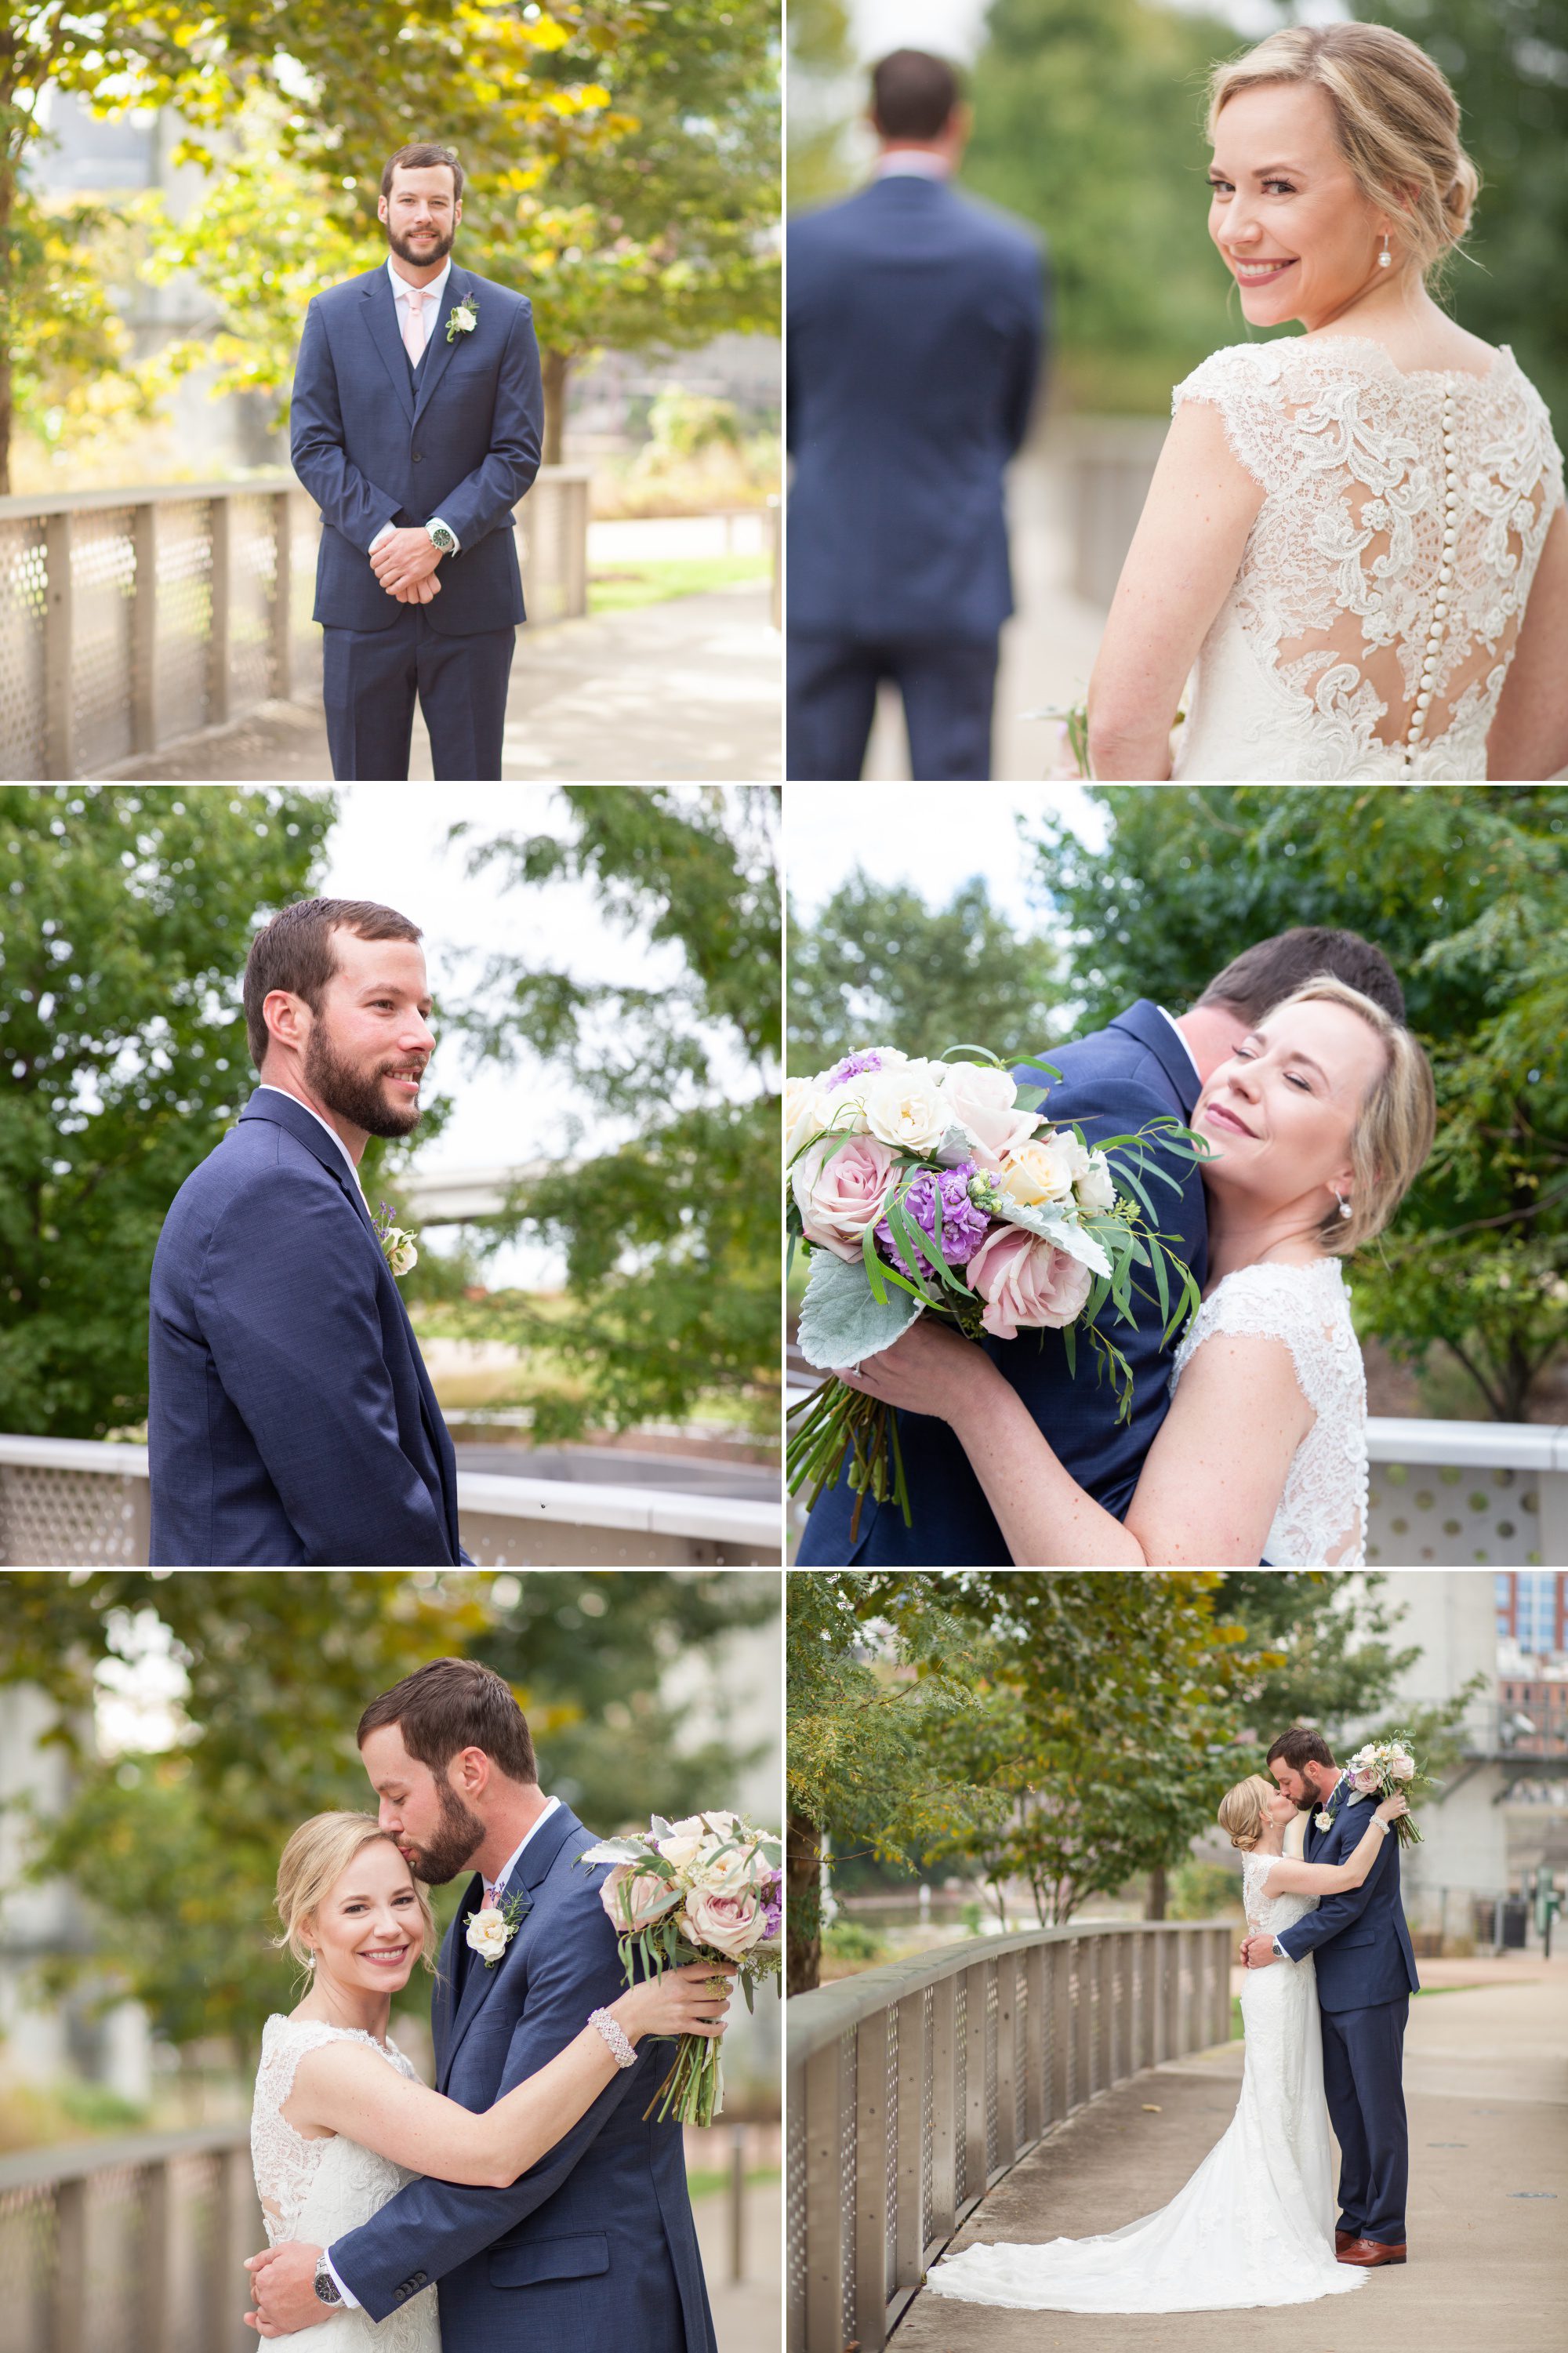 First look at park by Cumberland River before wedding photography at Musicians Hall of Fame in Nashville TN photos by Krista Lee 